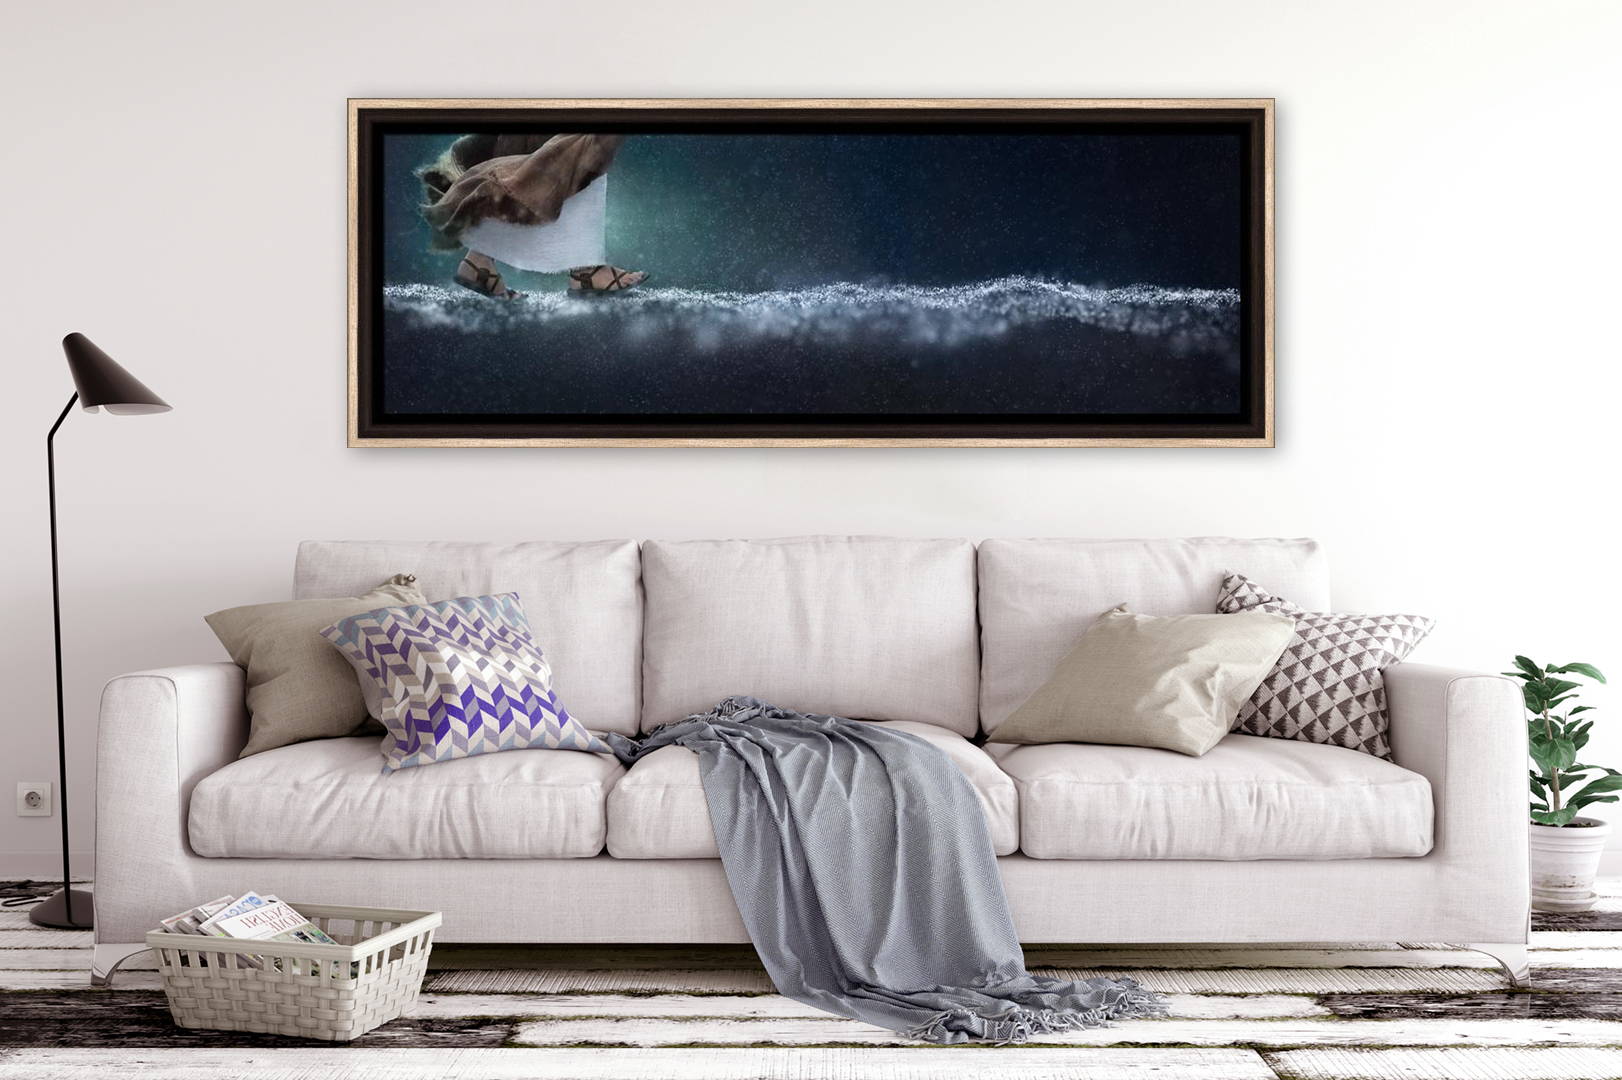 Panormaic picture of Jesus walking on water hanging above a sofa.